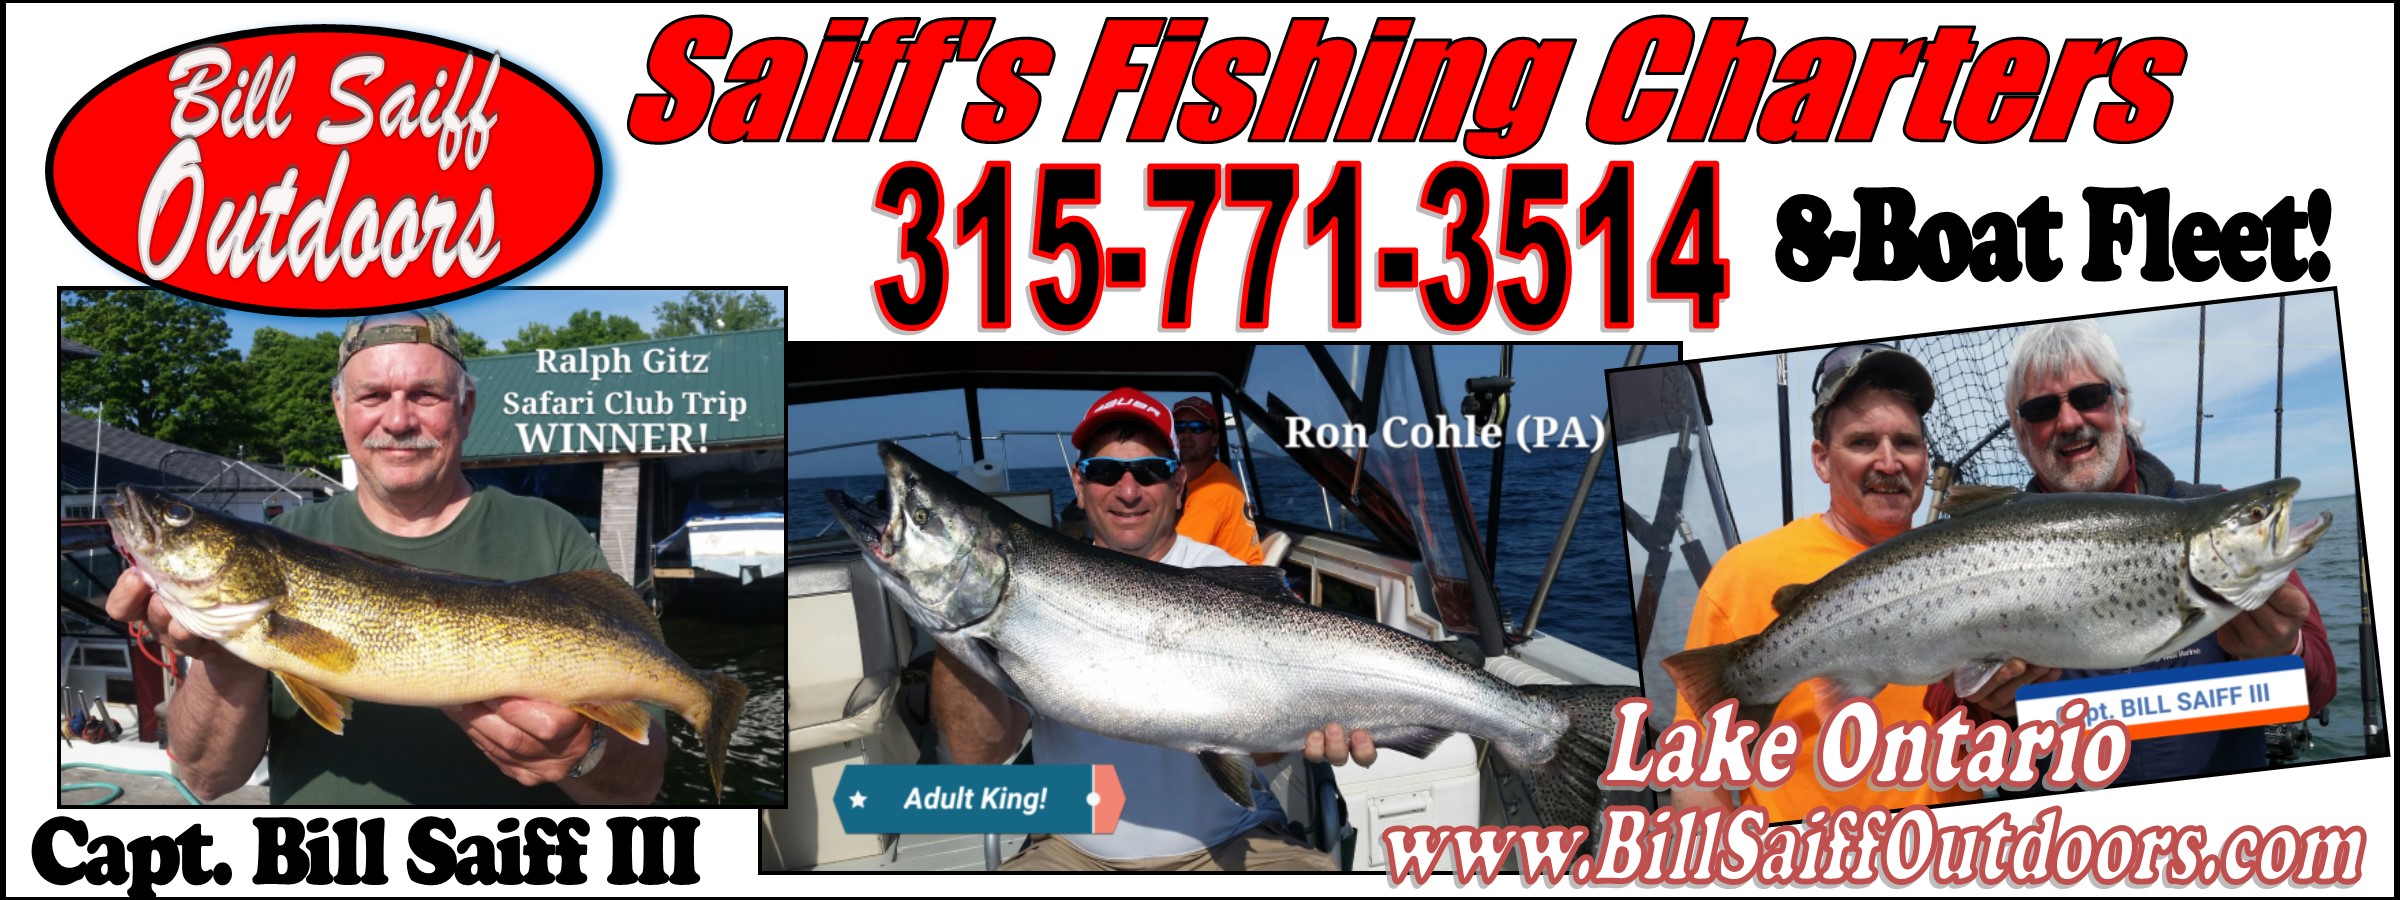 Bill Saiff Outdoors - Reap the Benefits of BOOKING EARLY! - Bill Saiff  Outdoors